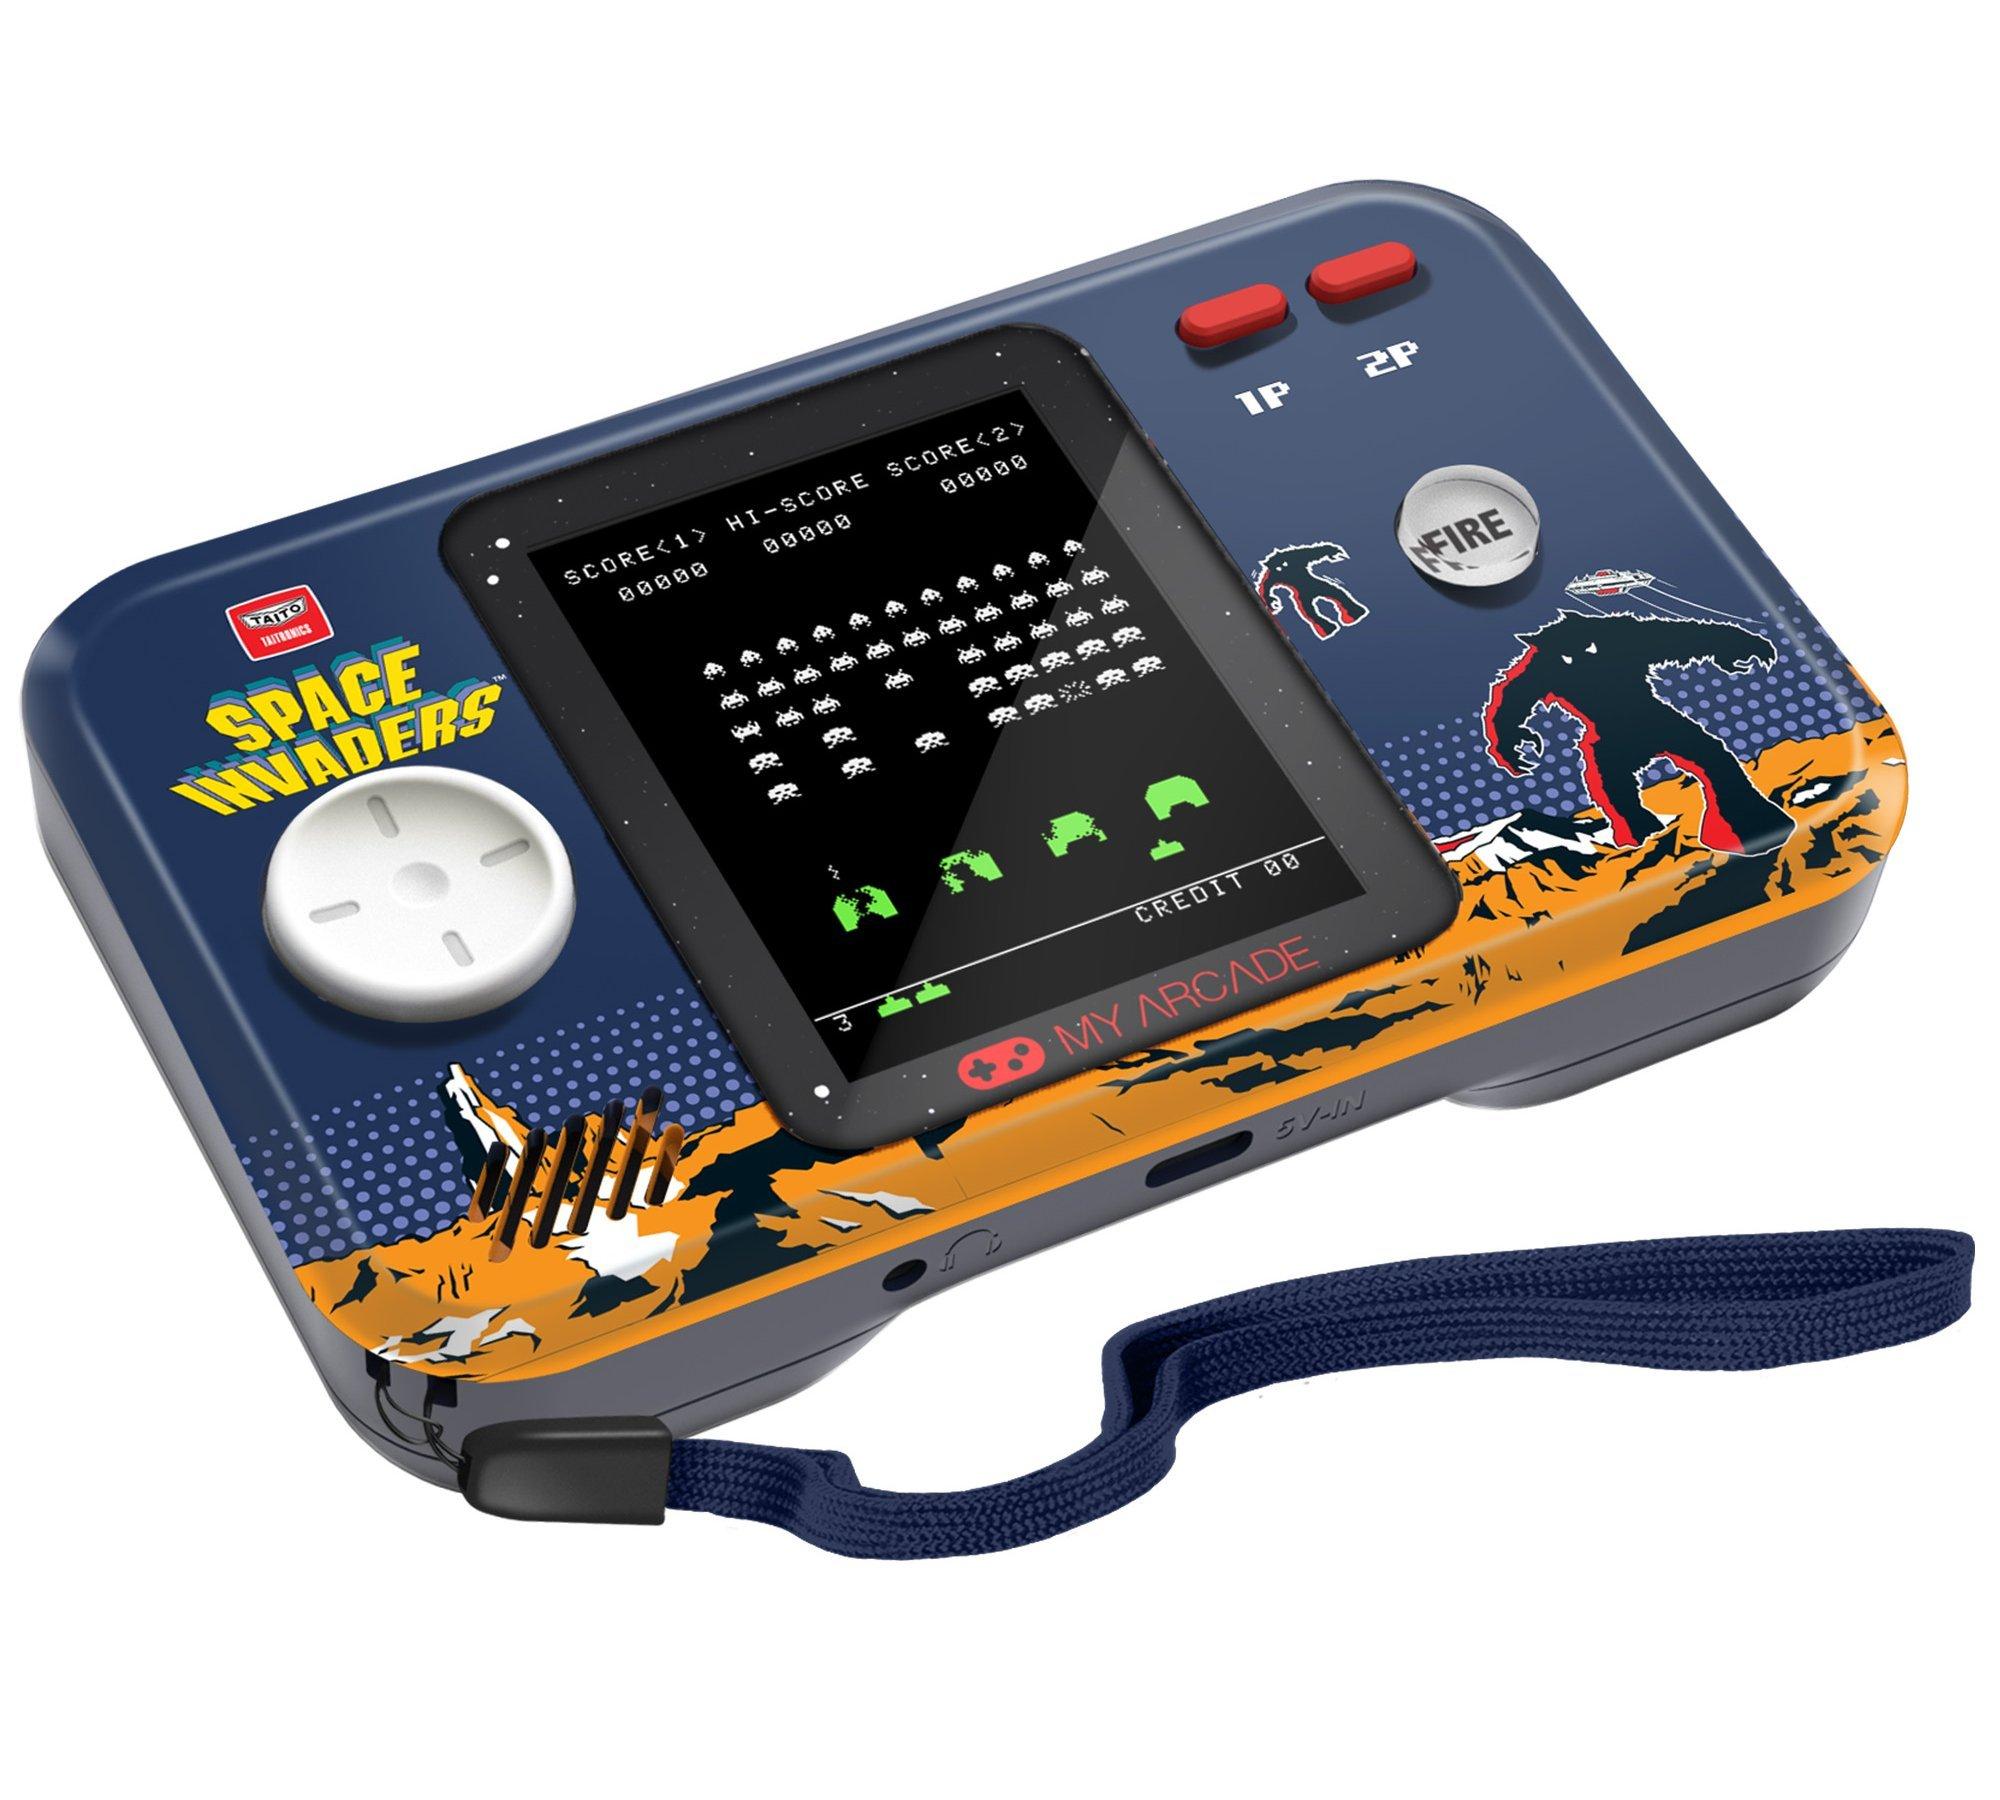 My Arcade SPACE INVADERS Pocket Player PRO Handheld Portable Video Game System